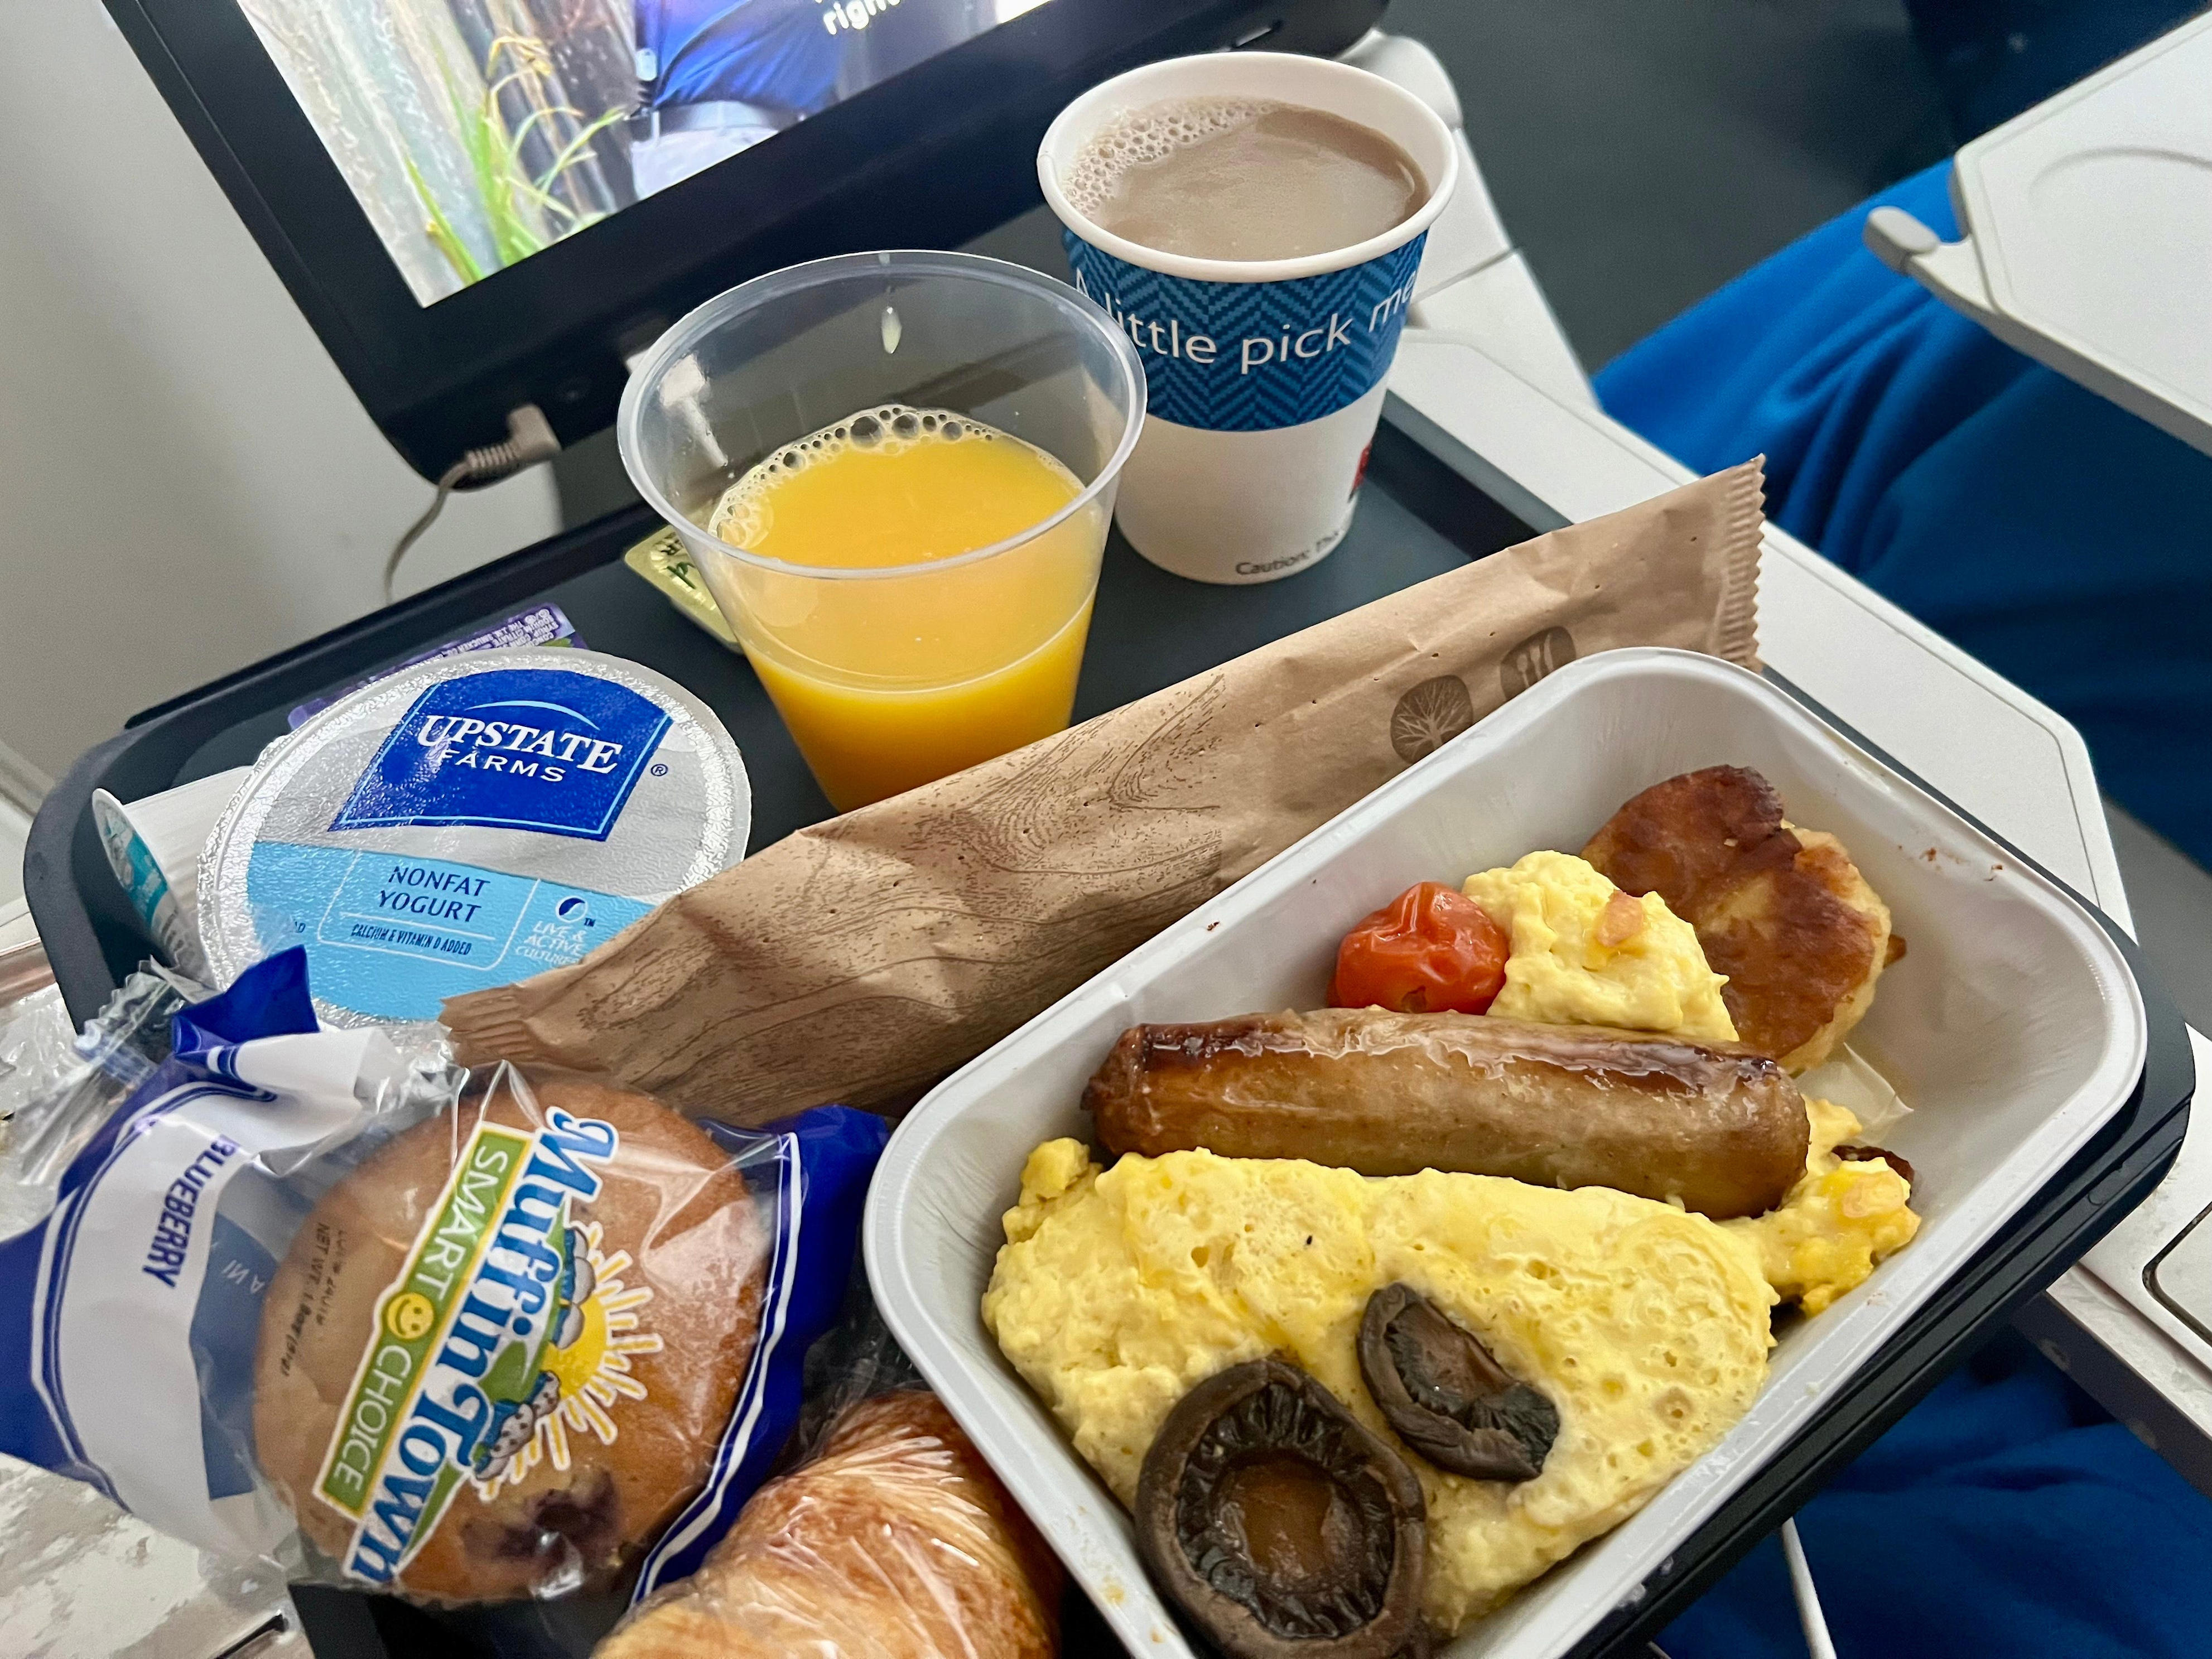 <p>This was the first daytime flight I'd taken to Europe, and I figured breakfast would be served given the morning departure. </p>